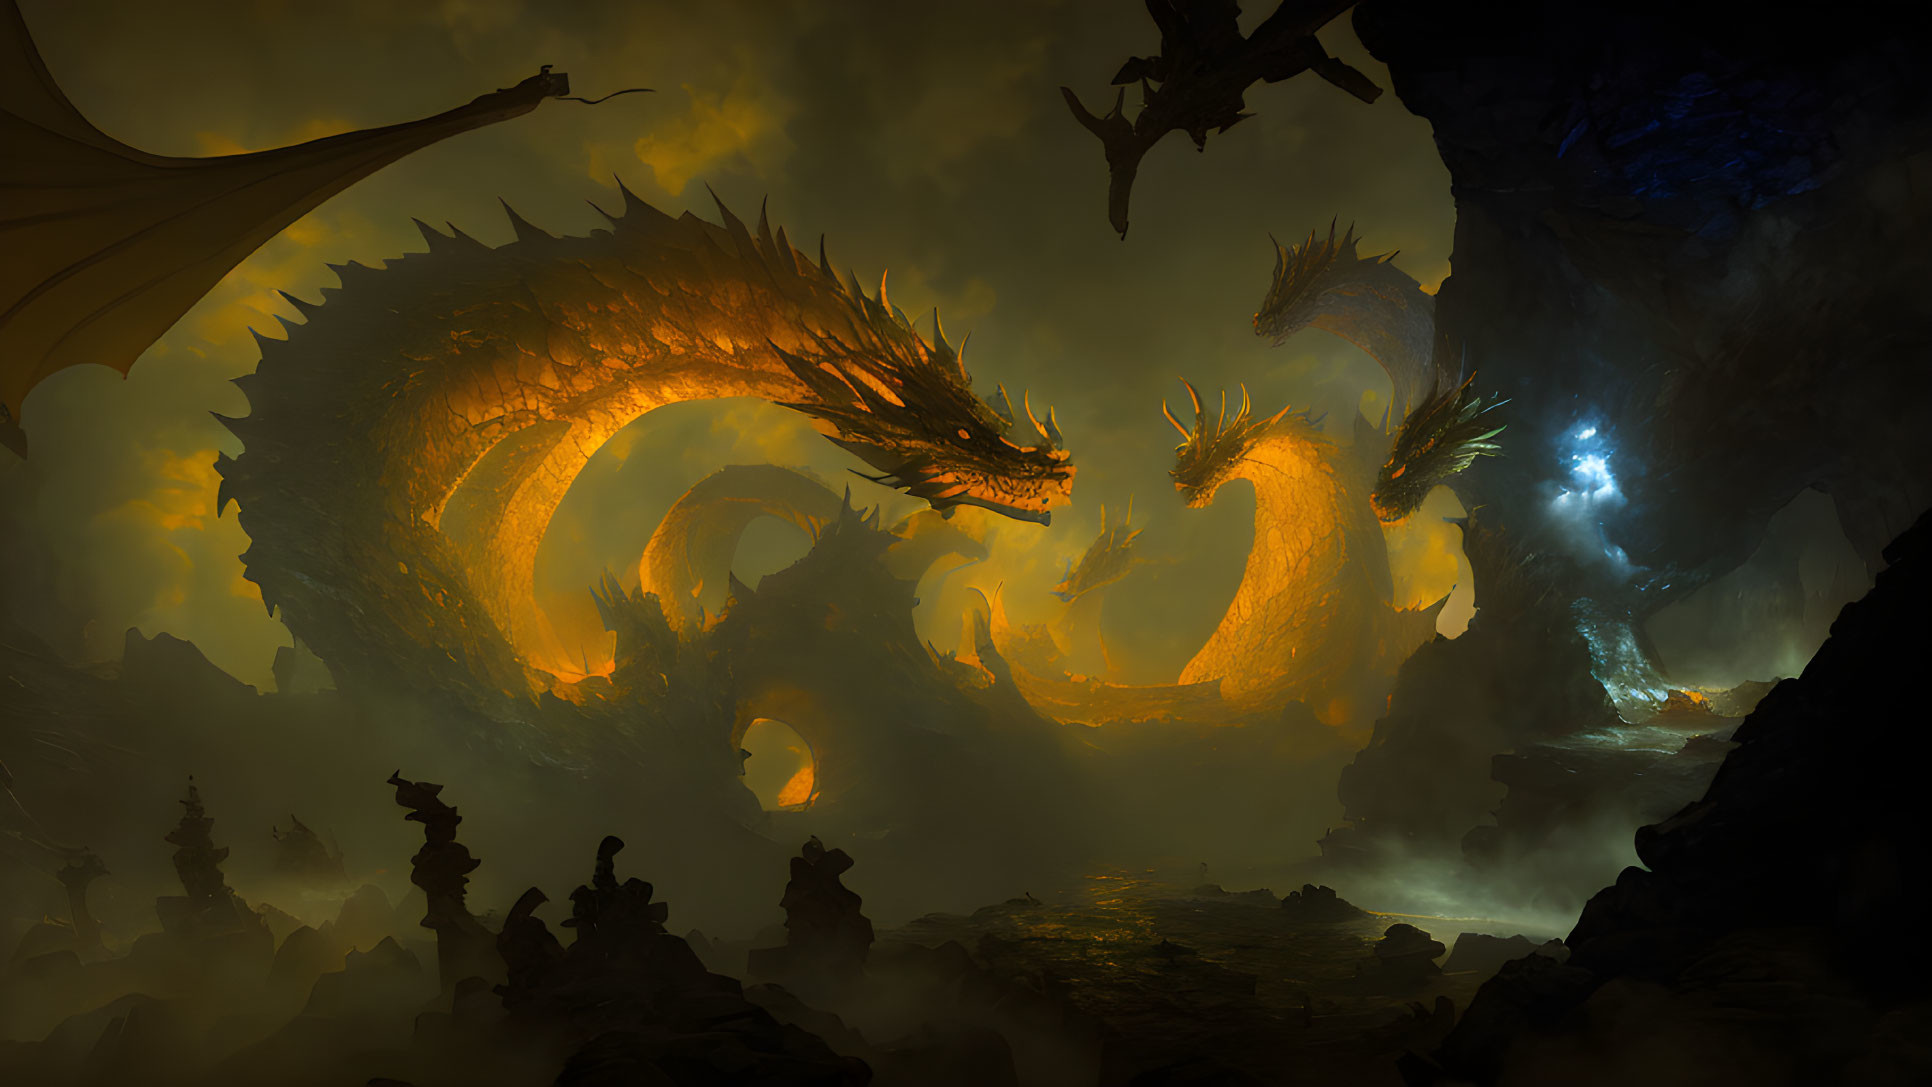 Two dragons breathe fire in a cave with a glowing crystal and shadowy figures in a misty setting